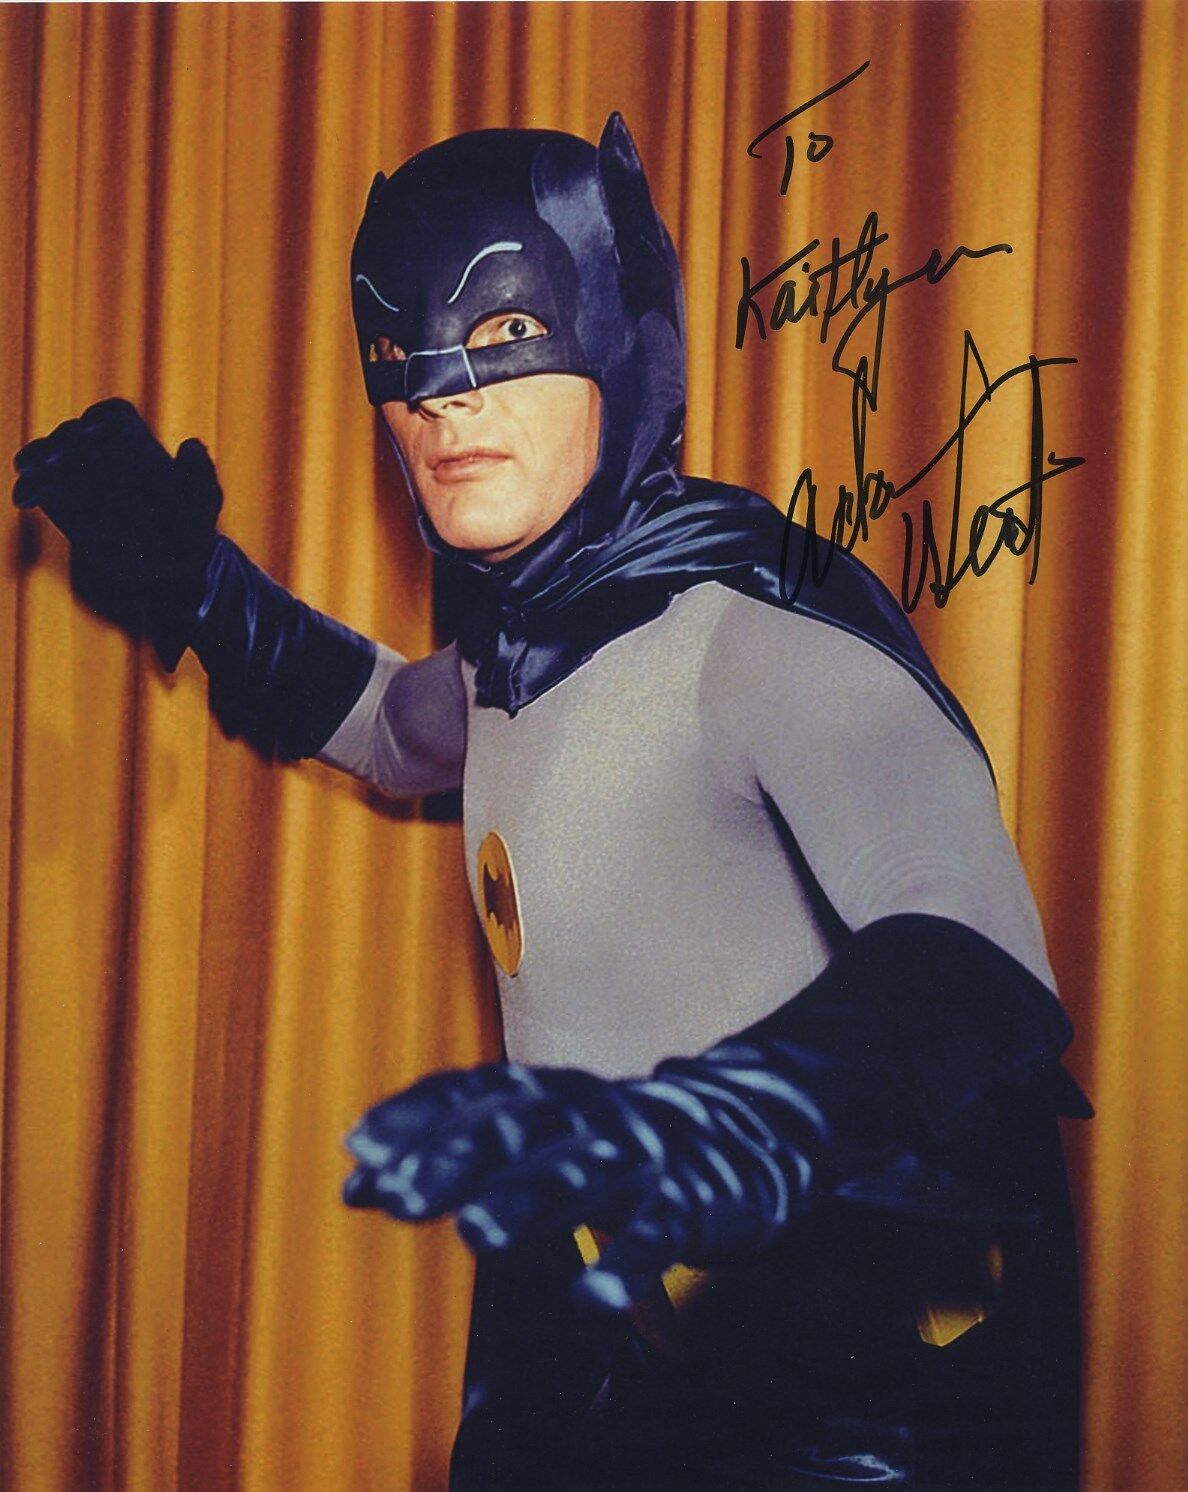 ADAM WEST SIGNED AUTOGRAPHED BATMAN COLOR PHOTO BAM ZOOM TO KAITLYN